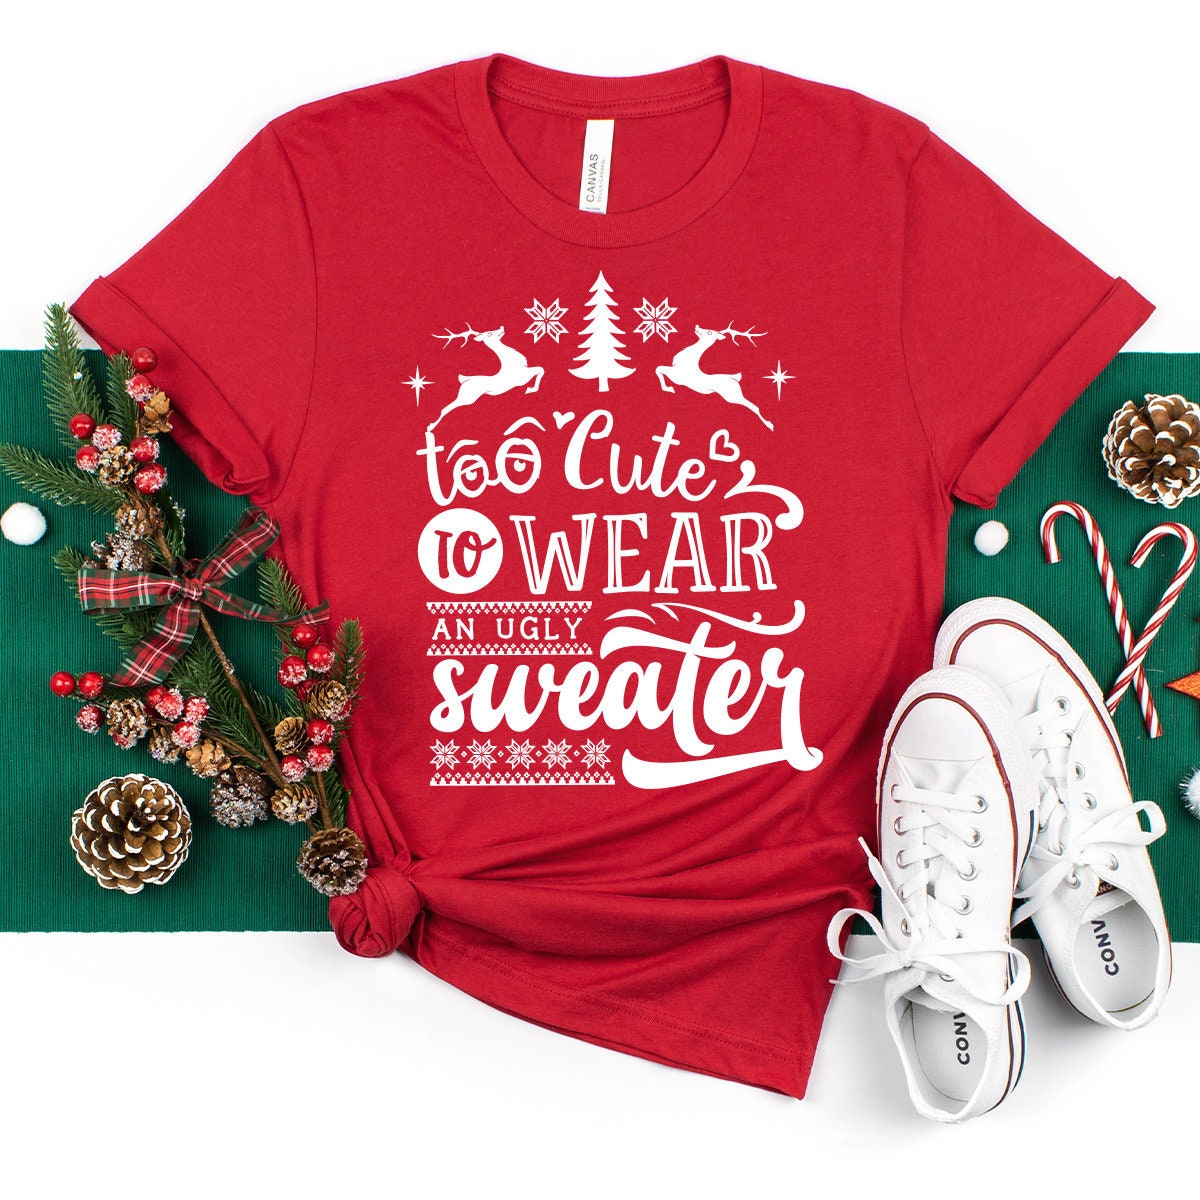 Too Cute To Wear Ugly Sweaters, Matching Christmas Shirts, Family Christmas Shirt, Christmas 2022 Shirt, Xmas Party Shirt, Funny Santa Shirt - Fastdeliverytees.com